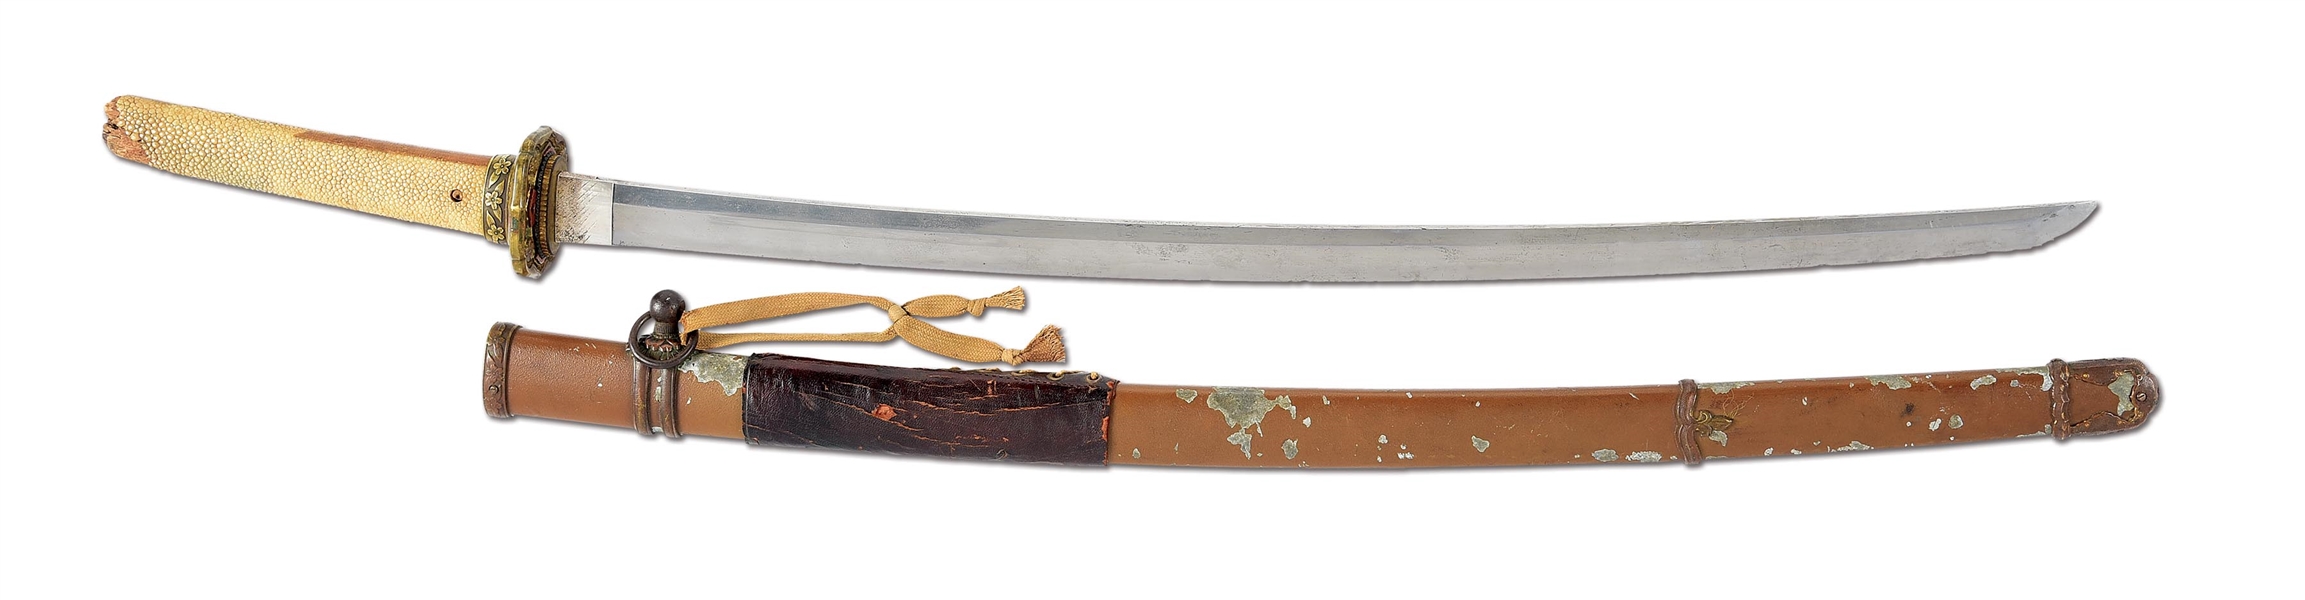 JAPANESE SAMURAI SWORD PRESENTED TO OFFICER IN 1937 WITH EXTENSIVE TANG INSCRIPTION..